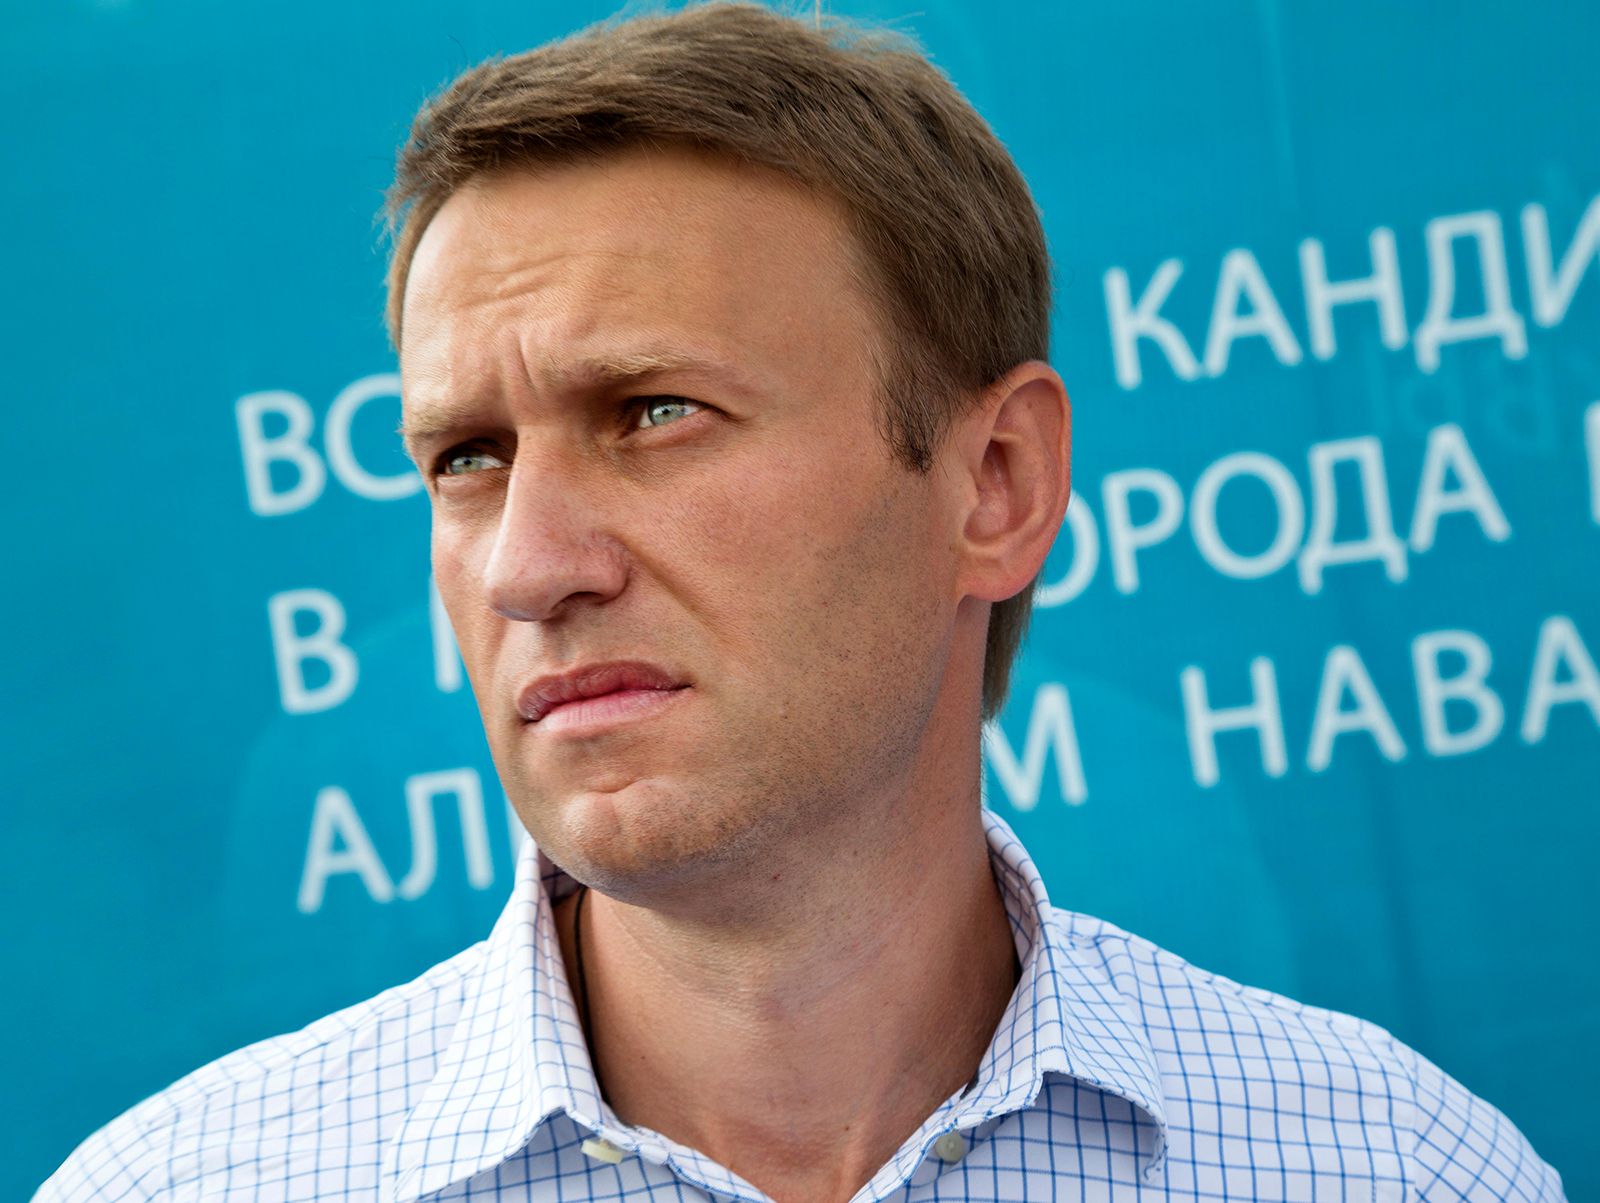 9-astonishing-facts-about-alexei-navalny